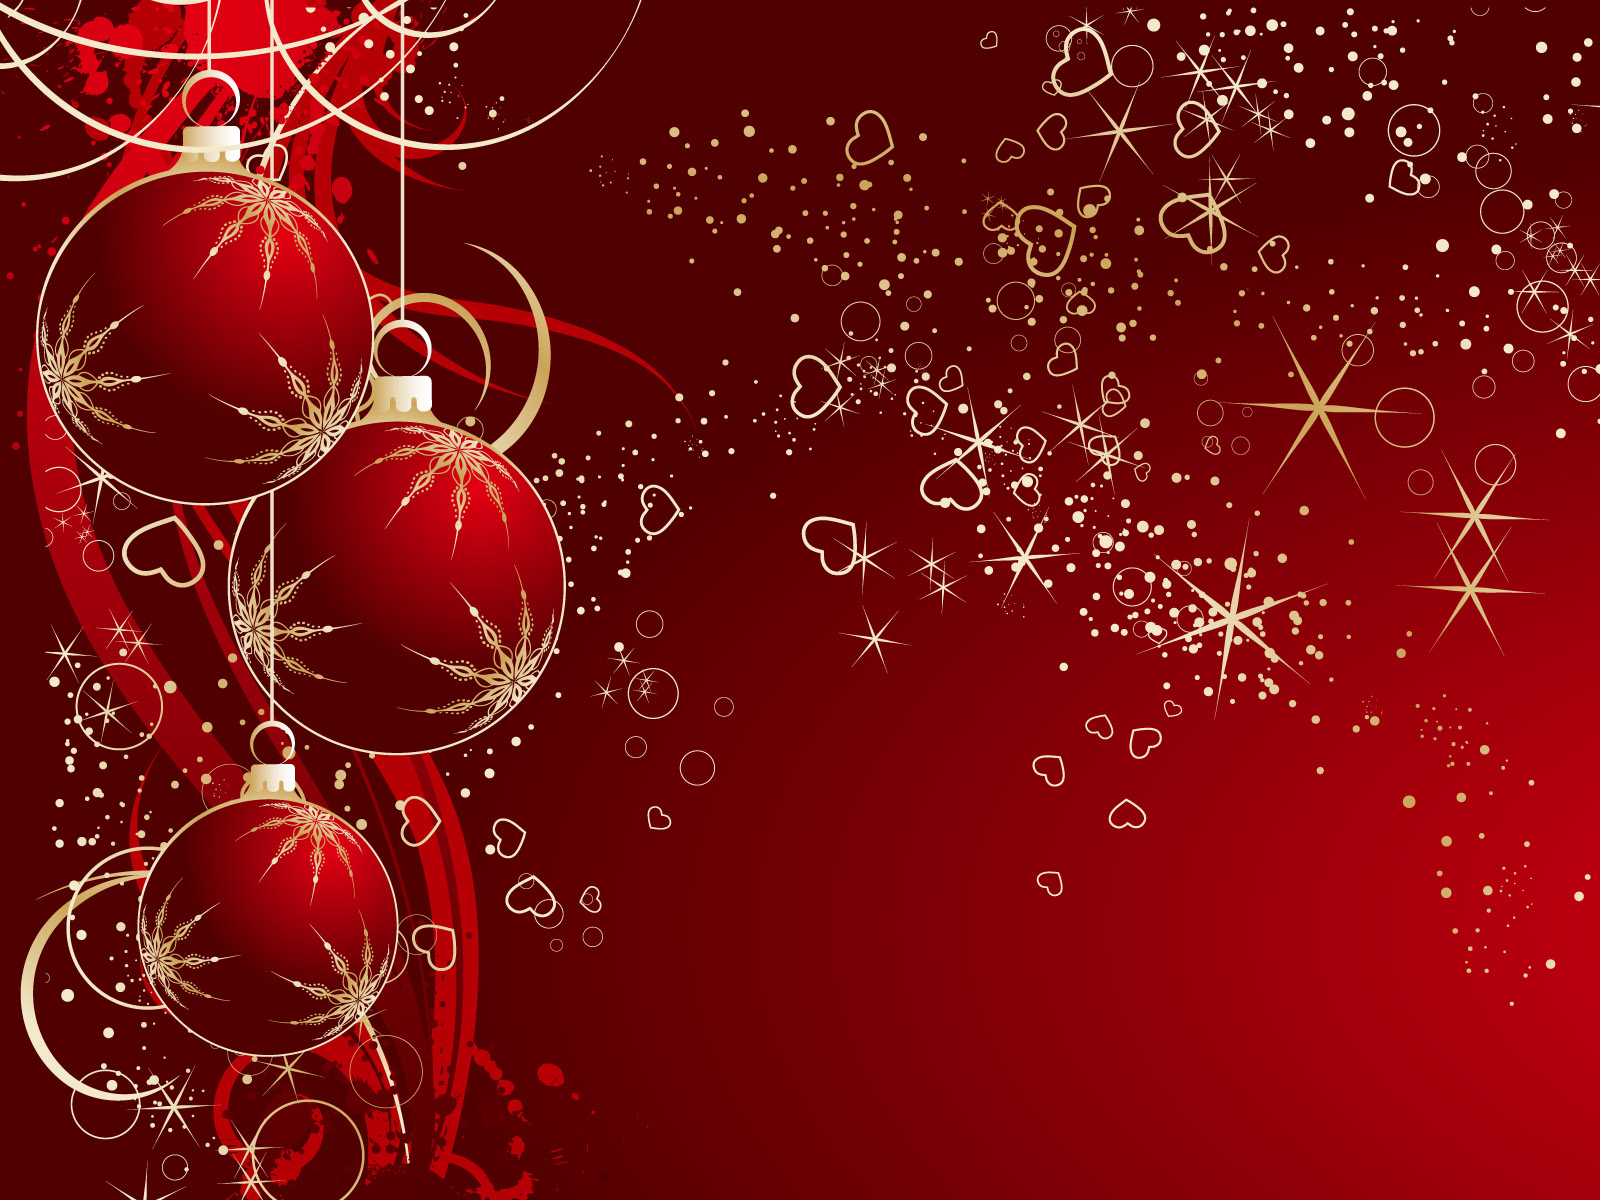 Free Christmas Wallpaper Backgrounds Wallpapers9